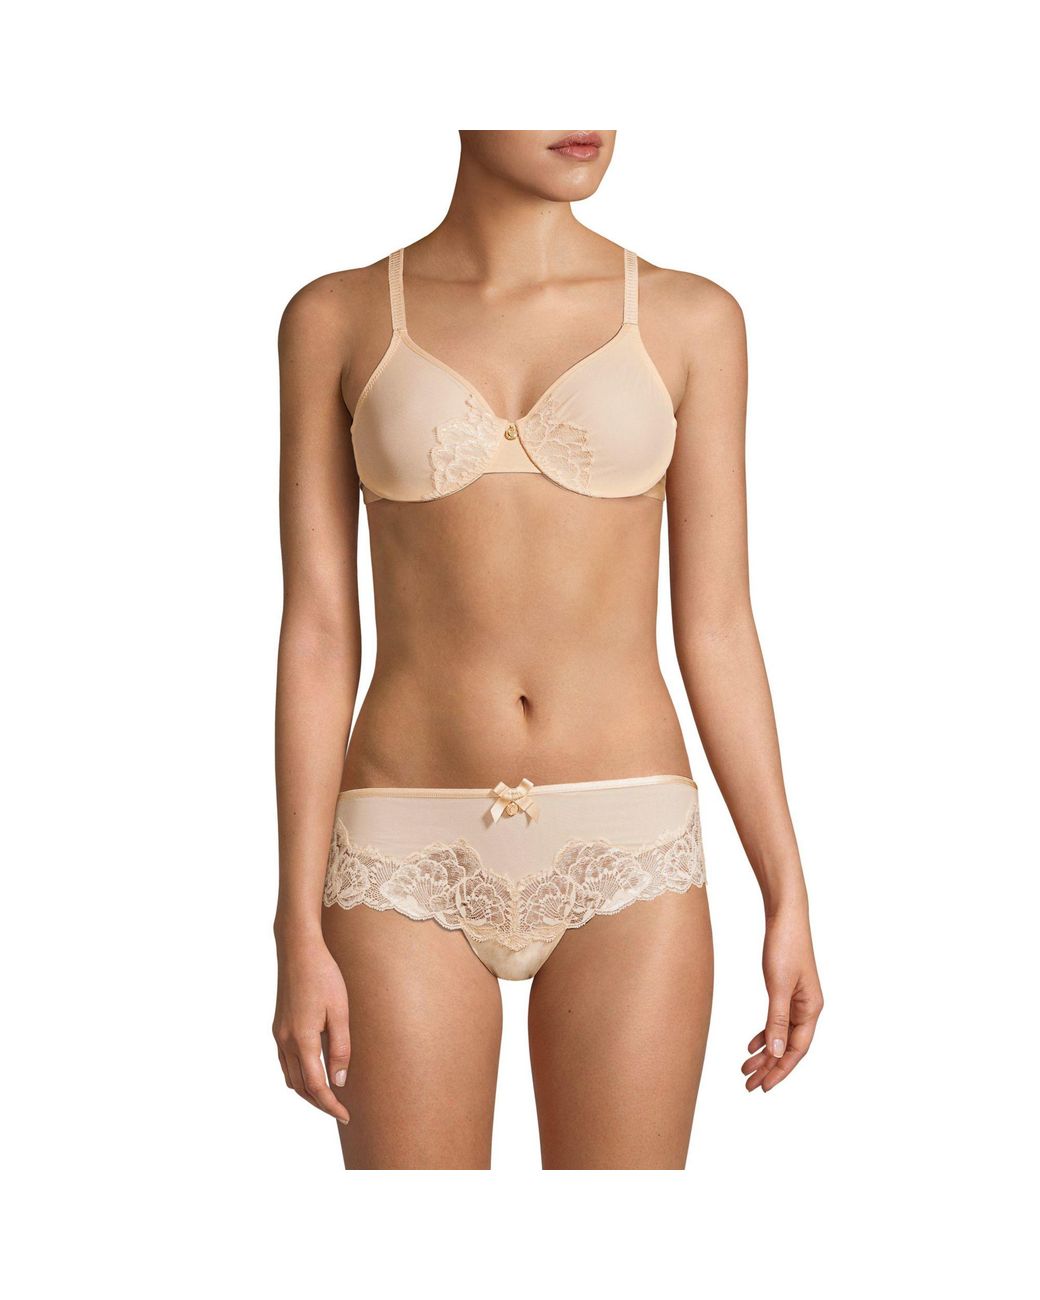 CHANTELLE 6767 ORANGERIE Full Coverage Unlined Bra NWT MSRP $78 Women's  Clothing Clothing, Shoes & Accessories